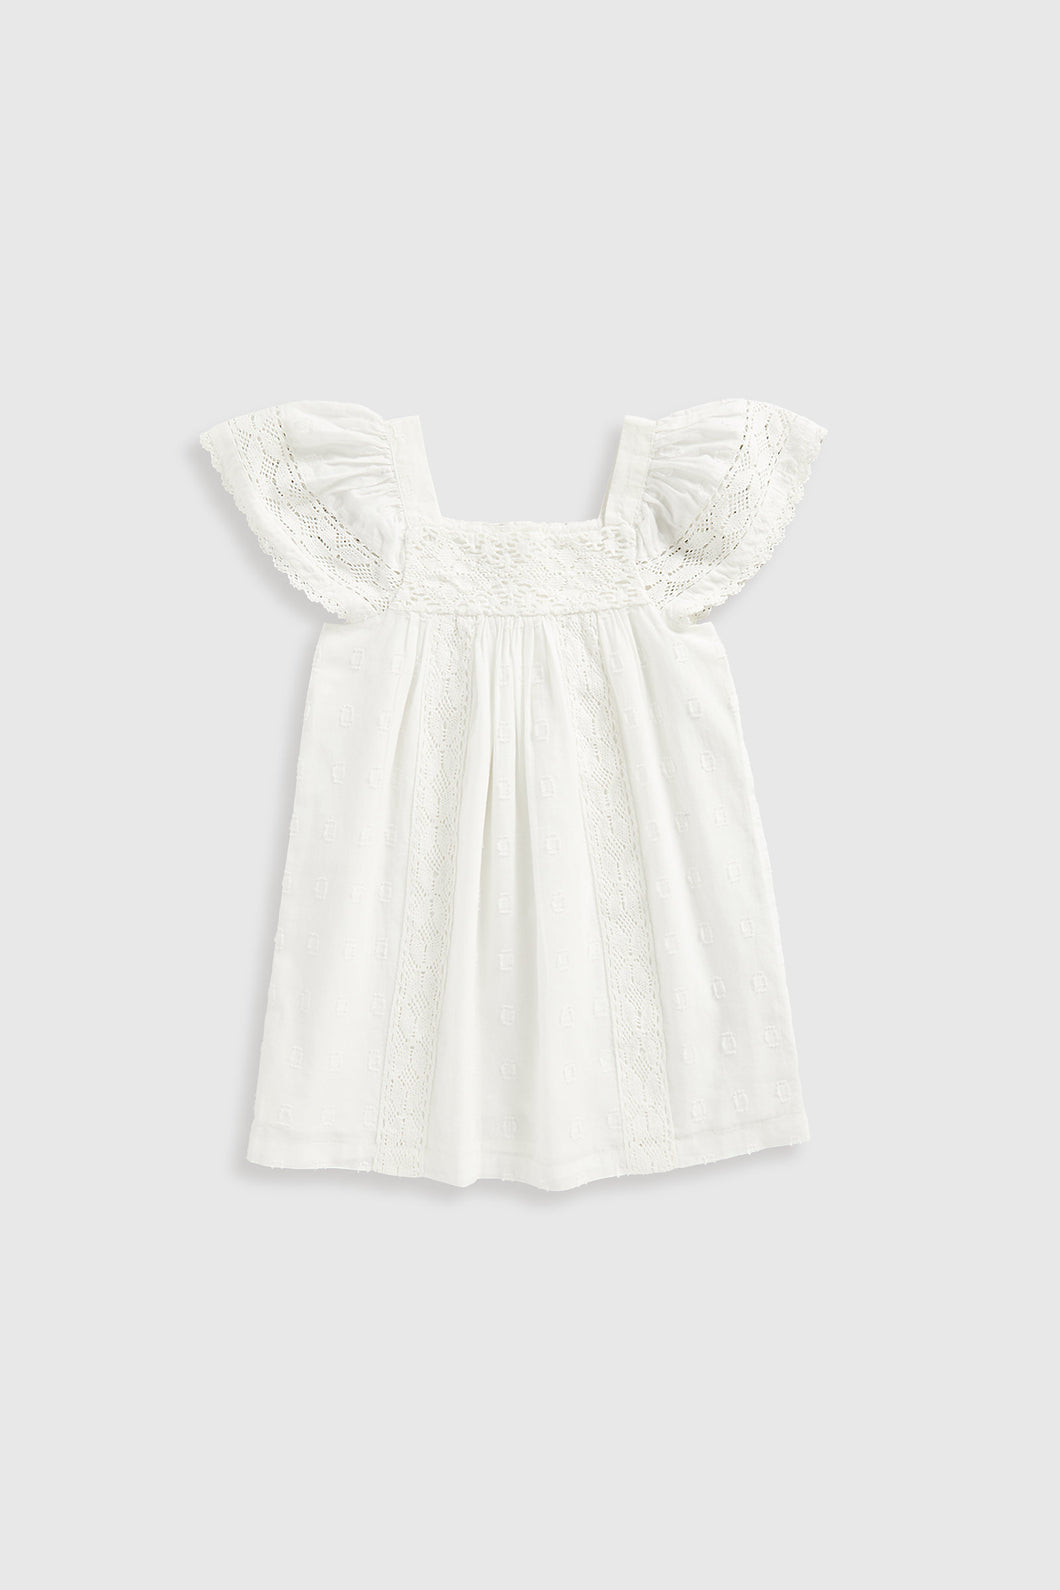 Mothercare White Lace Dress